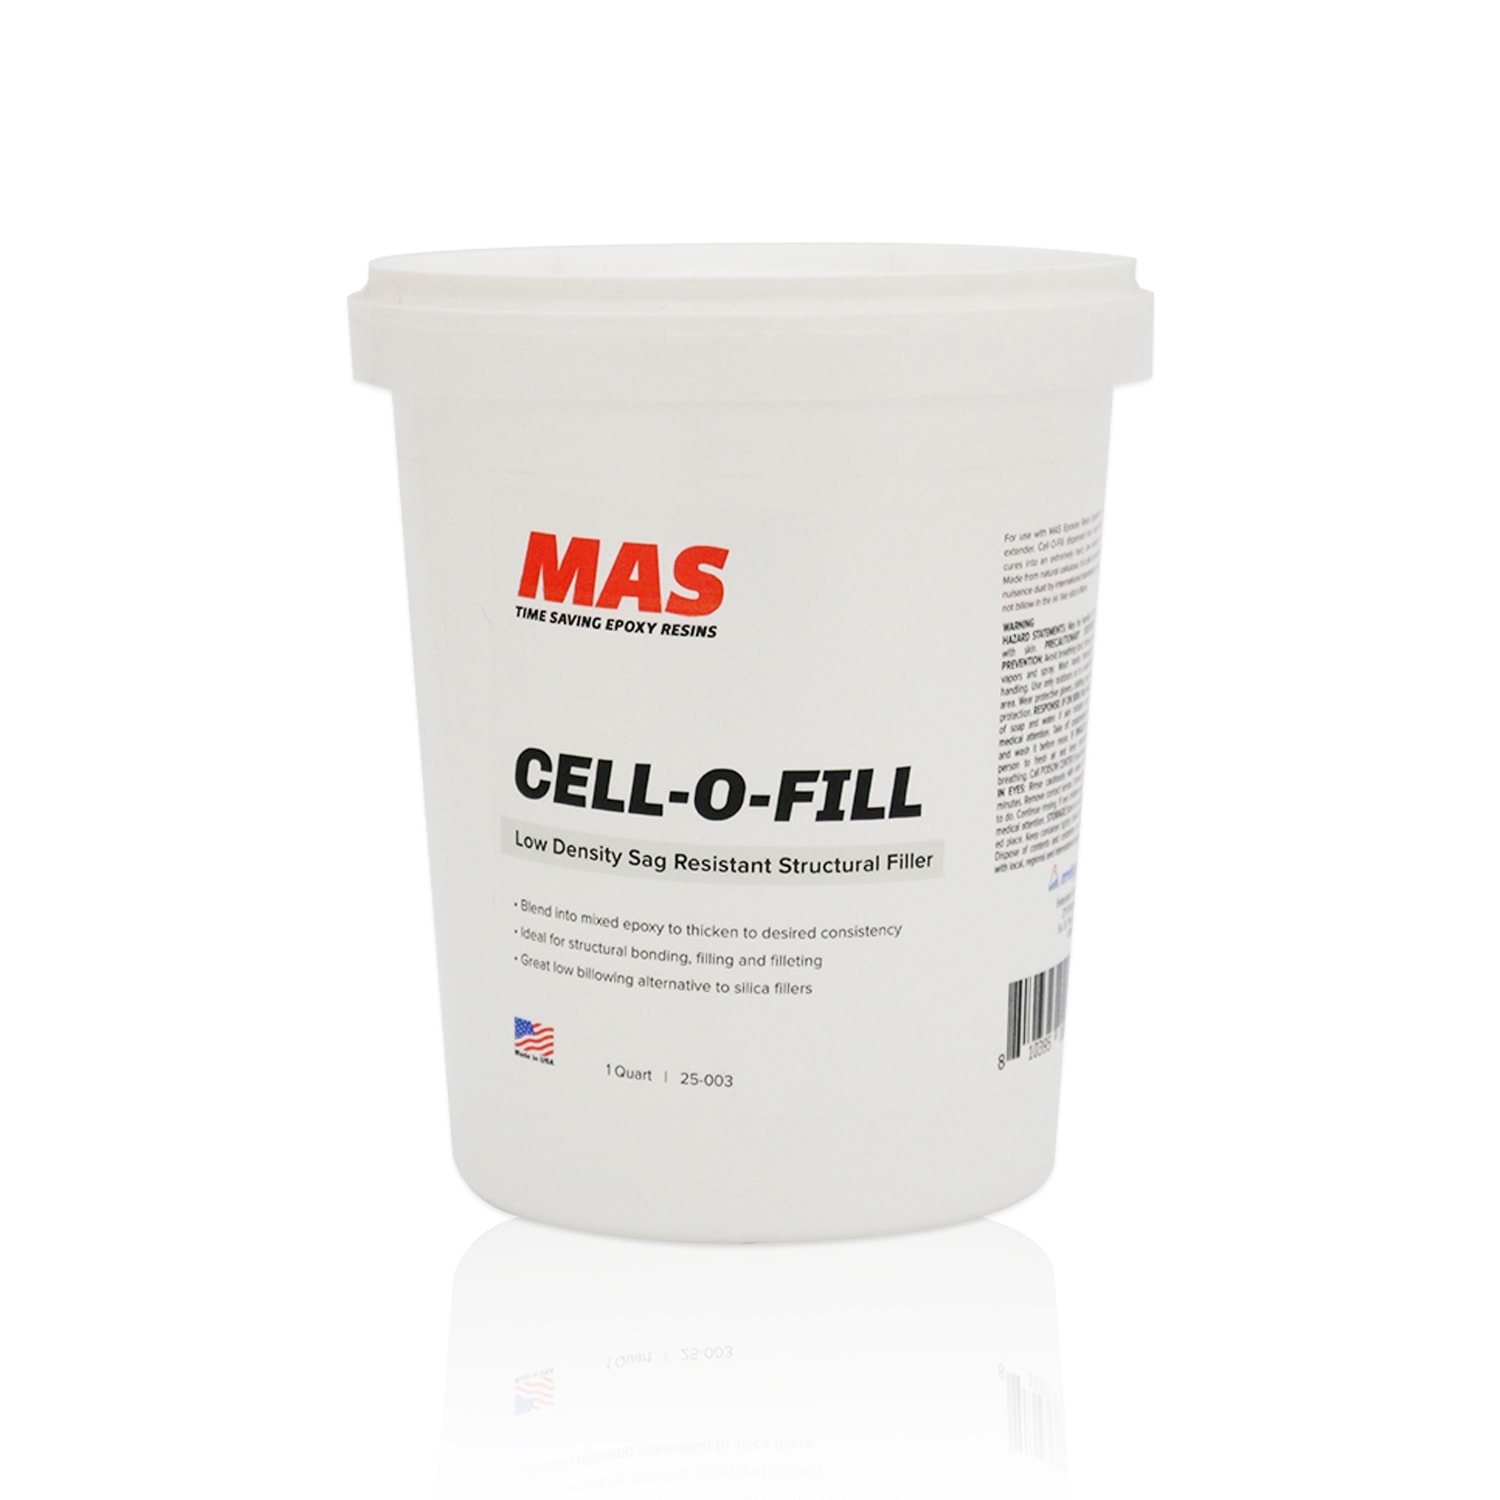 Cell-O-Fill Questions & Answers